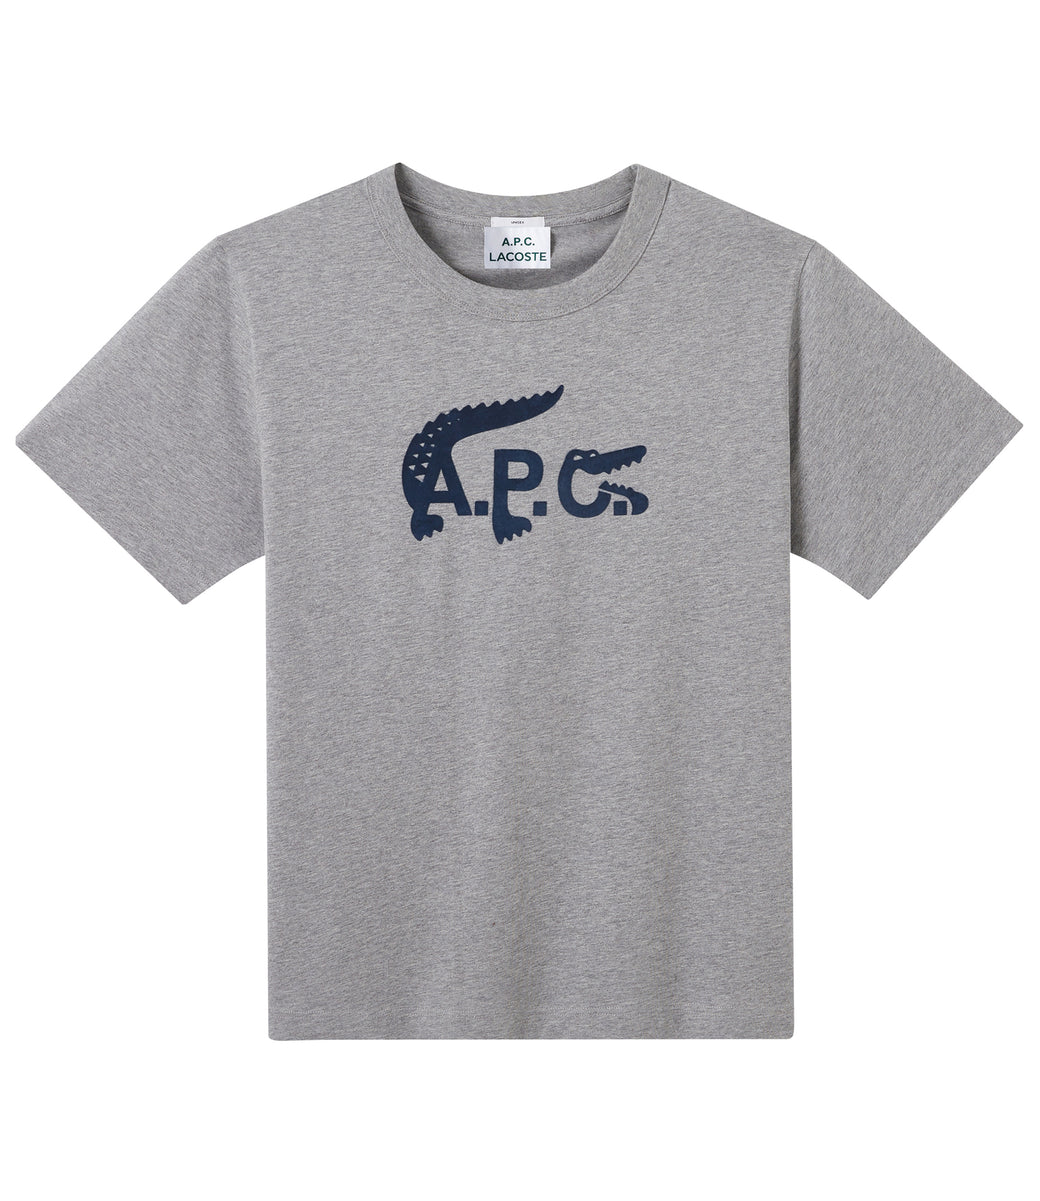 A.P.C. x Lacoste T-shirt Heather Gray - SS22 - US